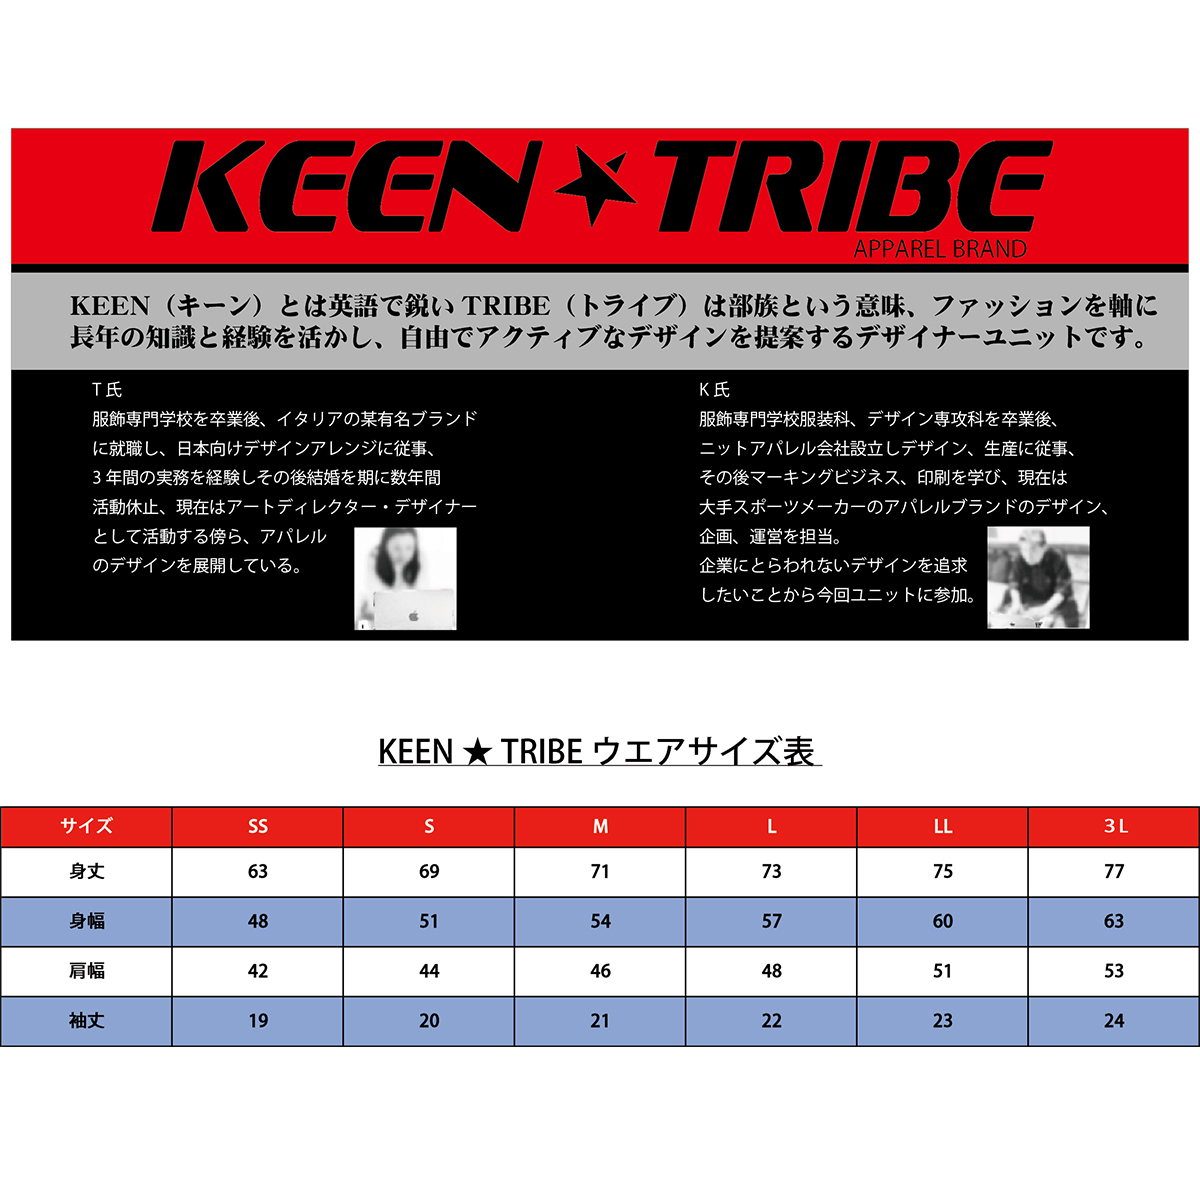 KEEN ★ TRIBE　KT-14(受注生産)